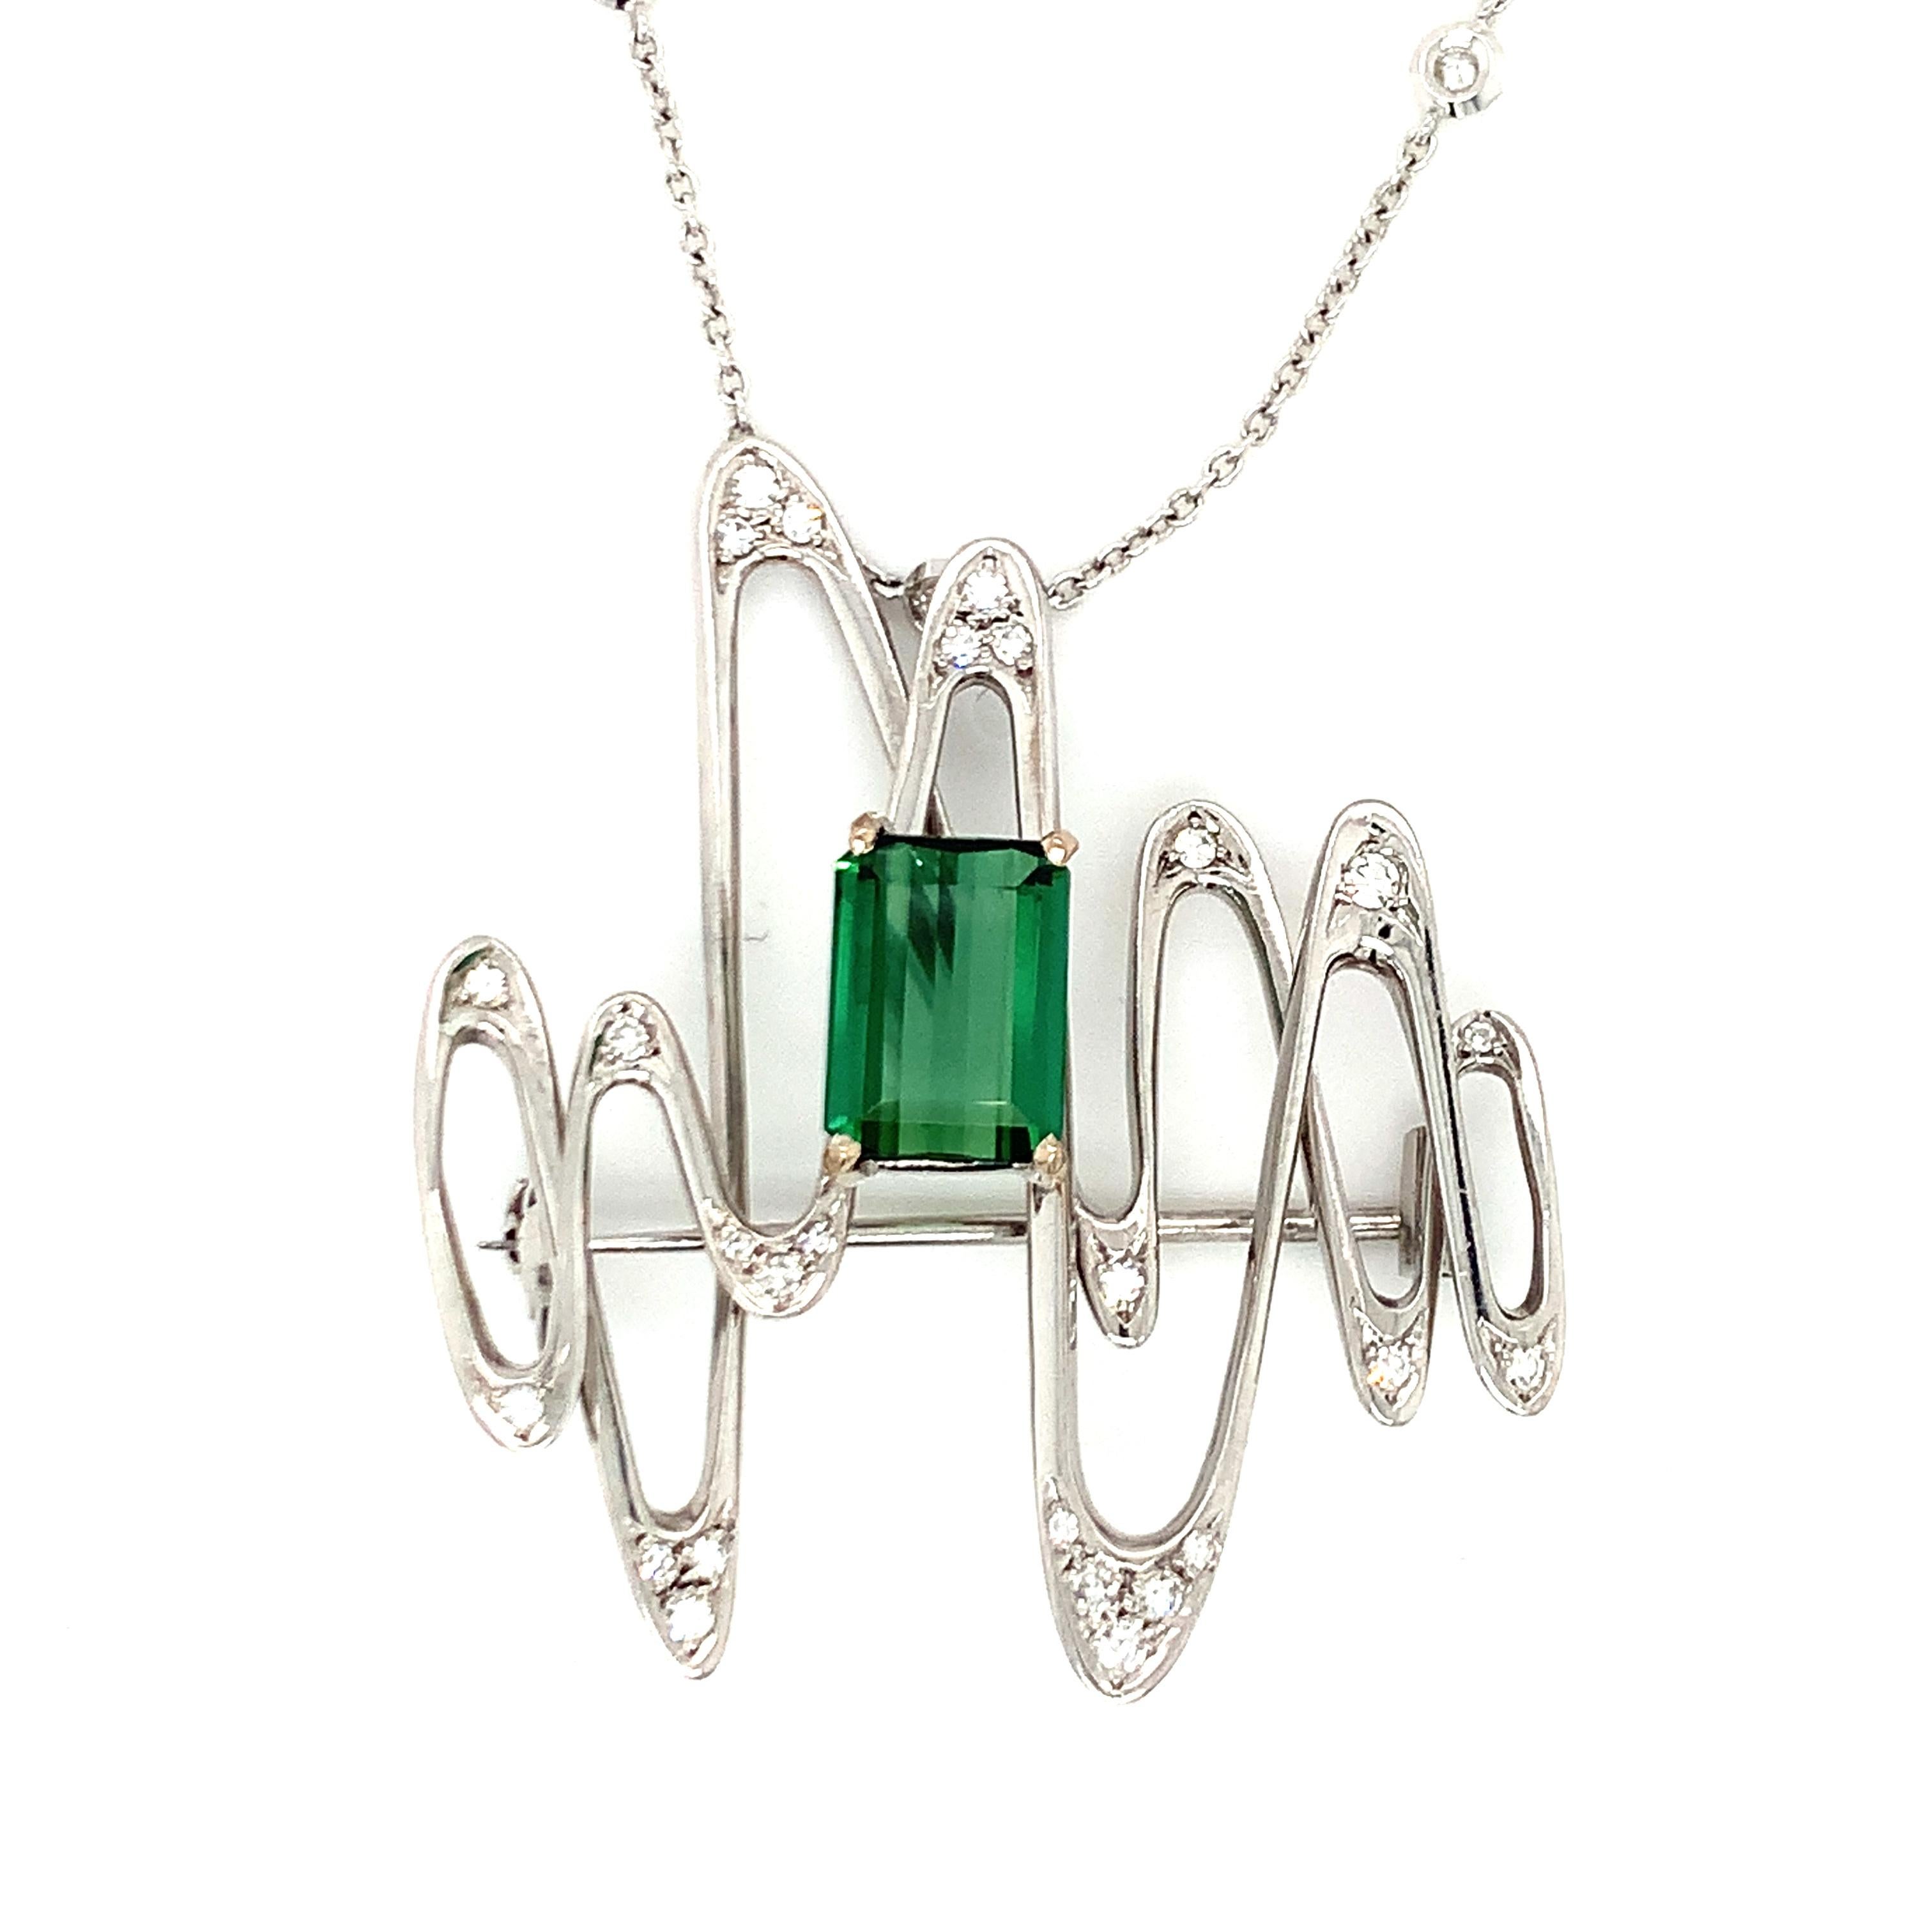 One green tourmaline and diamond 18K white gold brooch / pendant featuring an abstract design centering one emerald cut, green tourmaline weighing 3.50 ct. with 27 round brilliant diamond accents totaling 0.30 ct. Attached to an 18K white gold